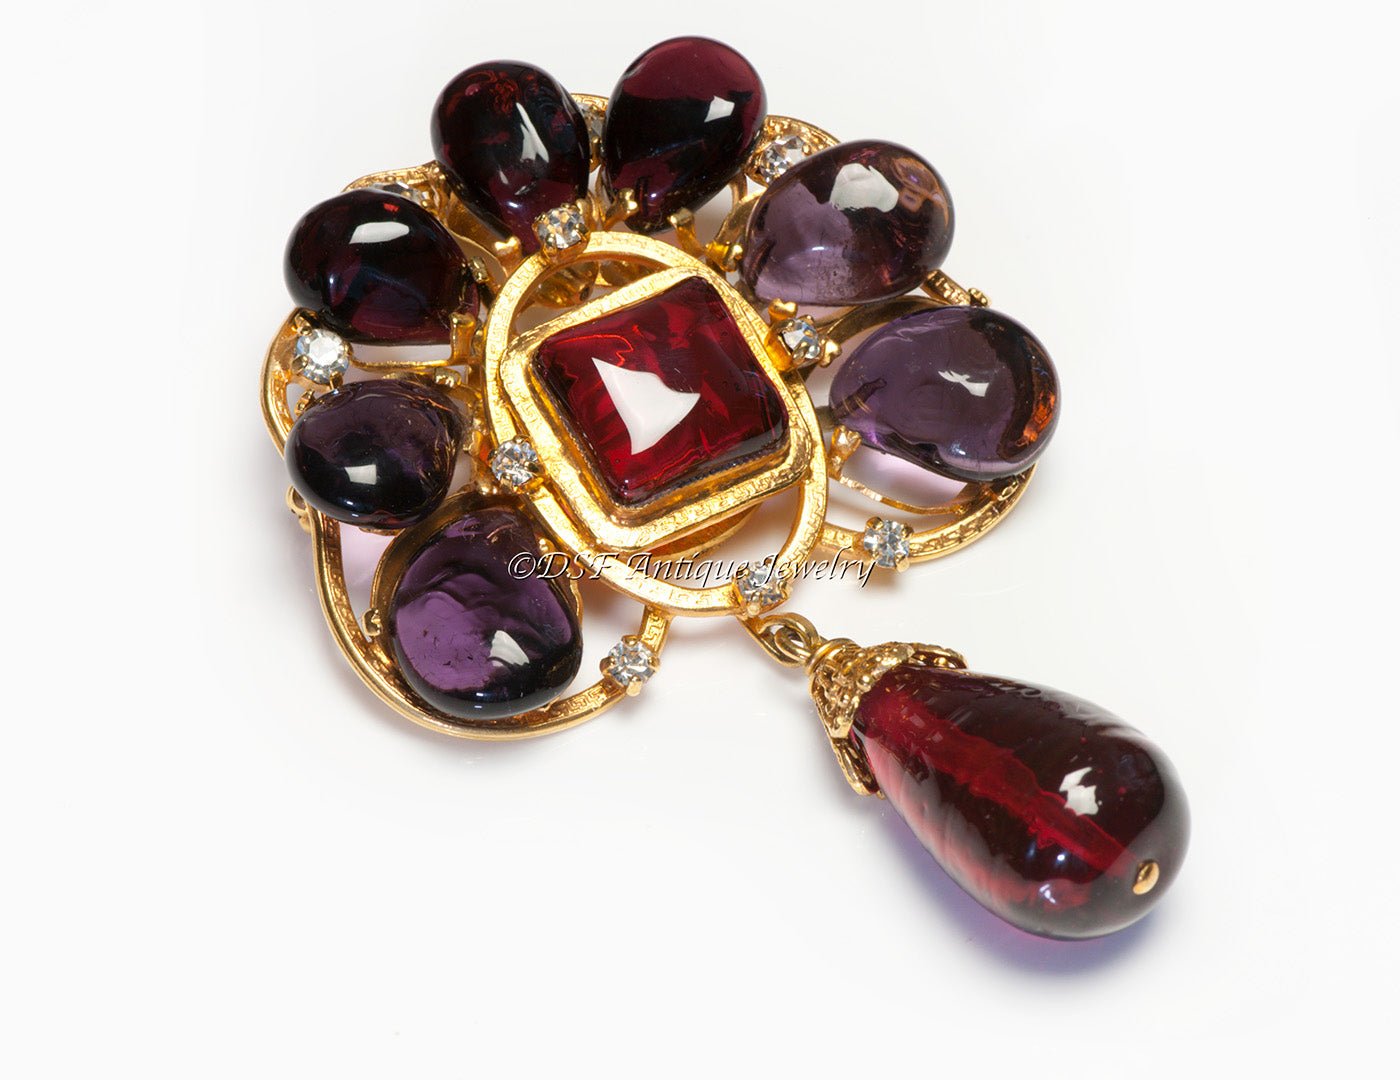 Chanel Paris Fall 1996 Maison Gripoix Purple Red Poured Glass Pendant Brooch - DSF Antique Jewelry